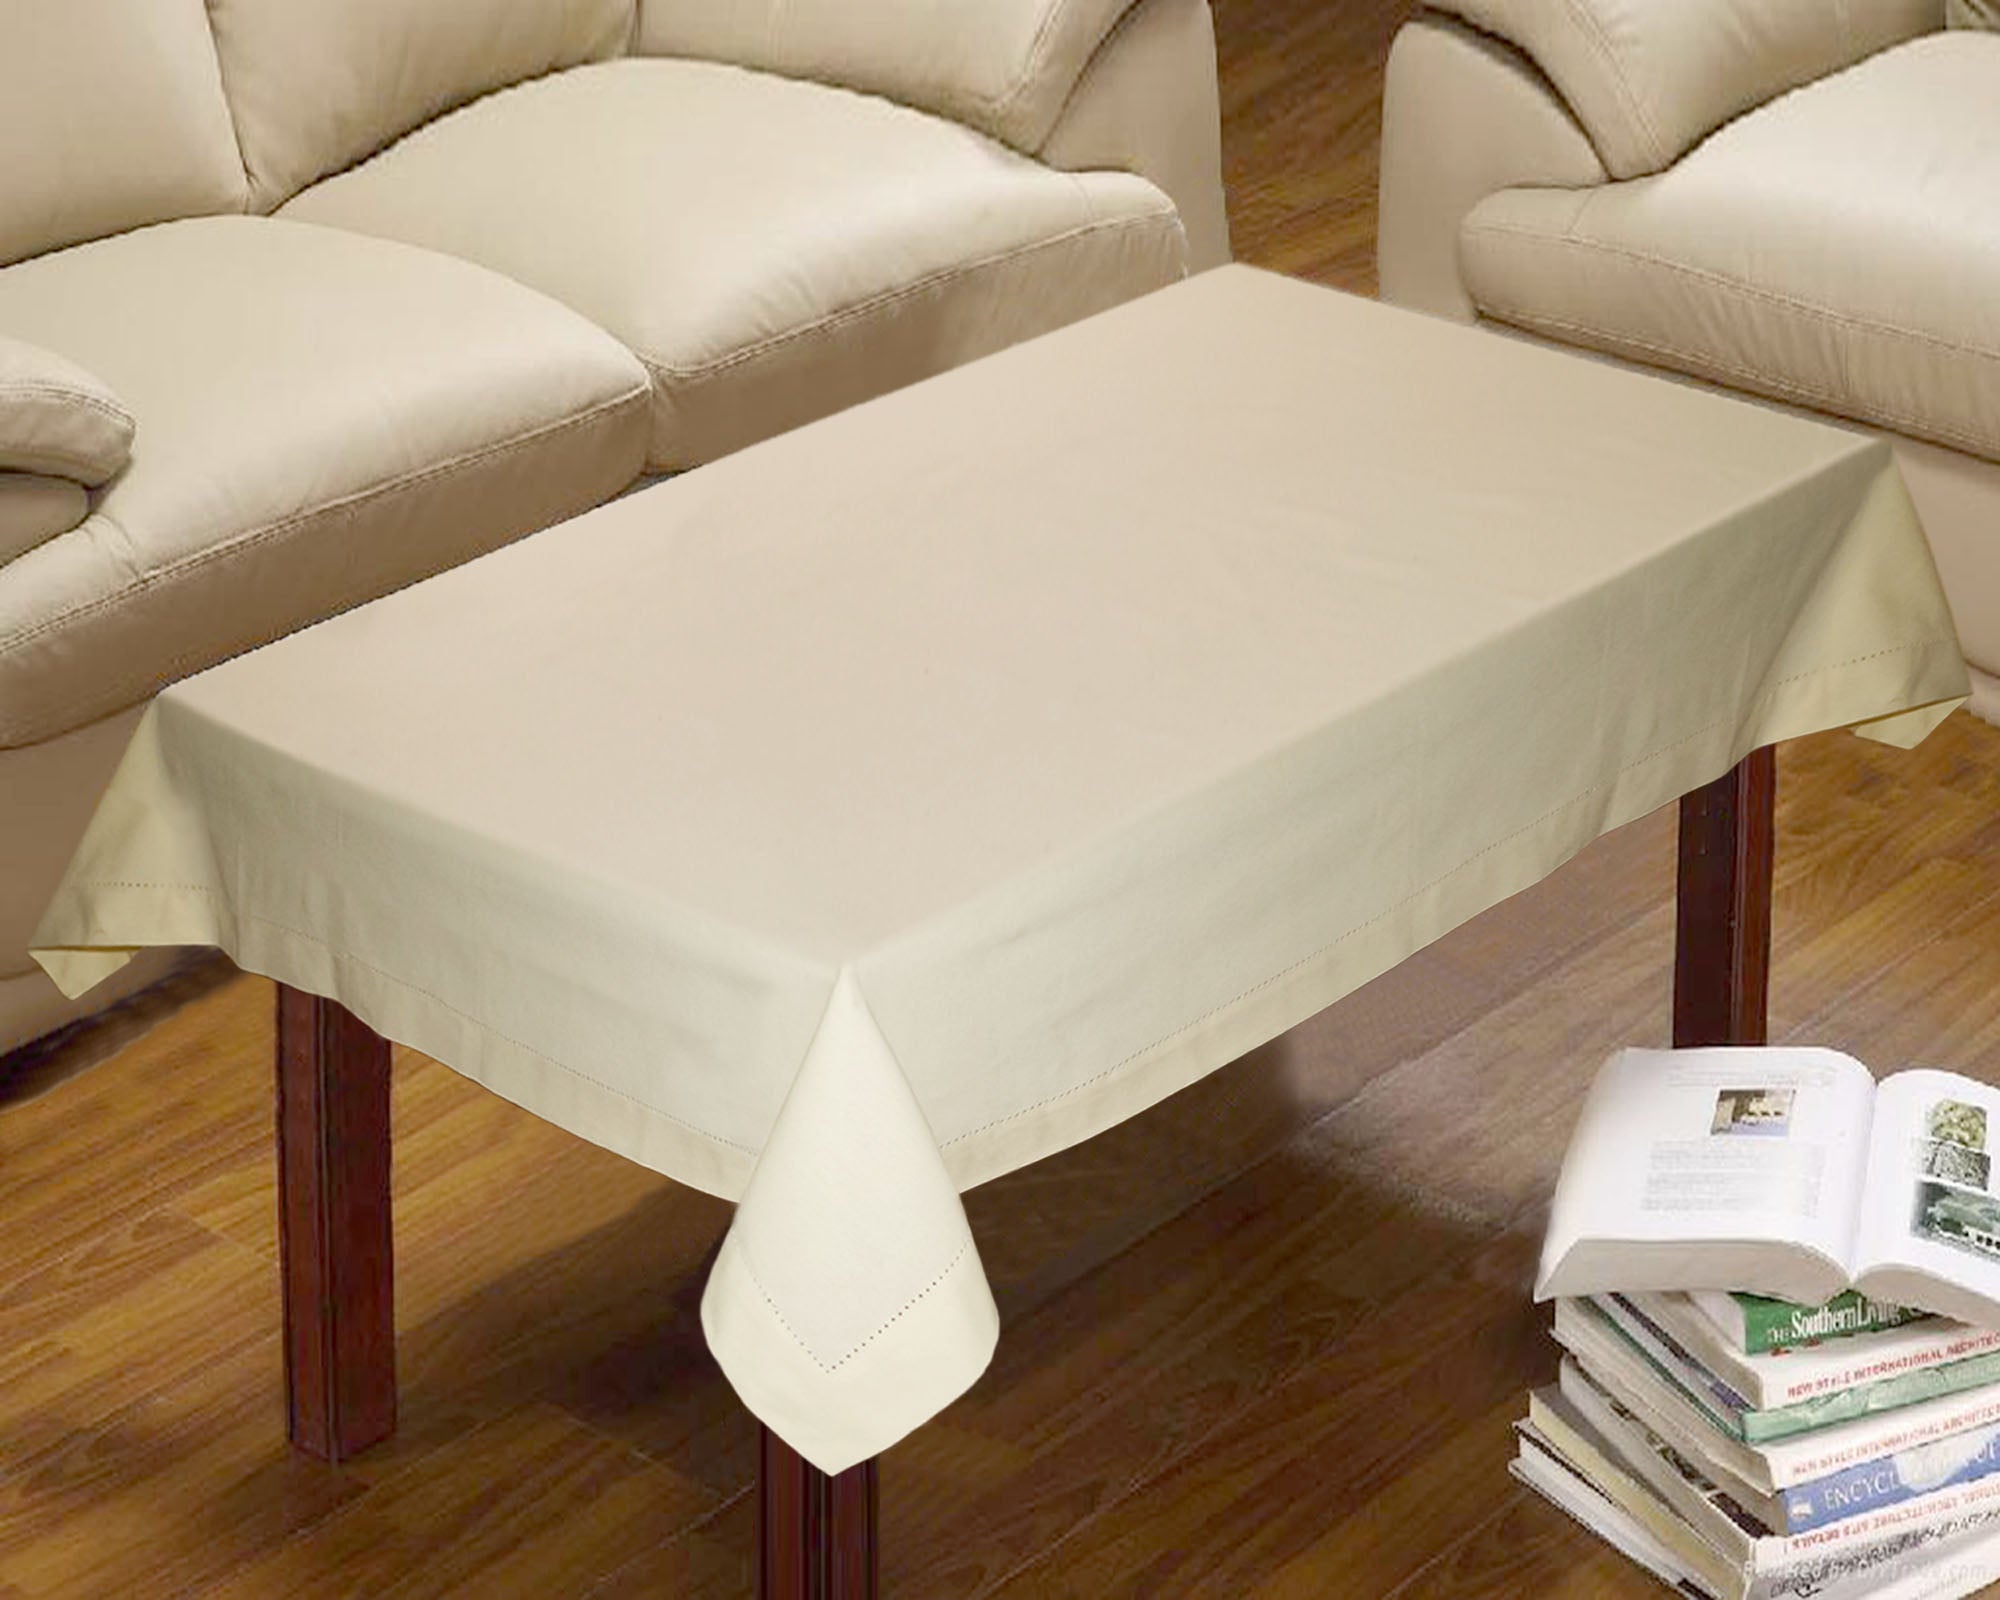 Lushomes center table cover, Cotton Cream Plain Dining Table Cover Cloth (Size 36 x 60 Inches, Center Table Cloth)